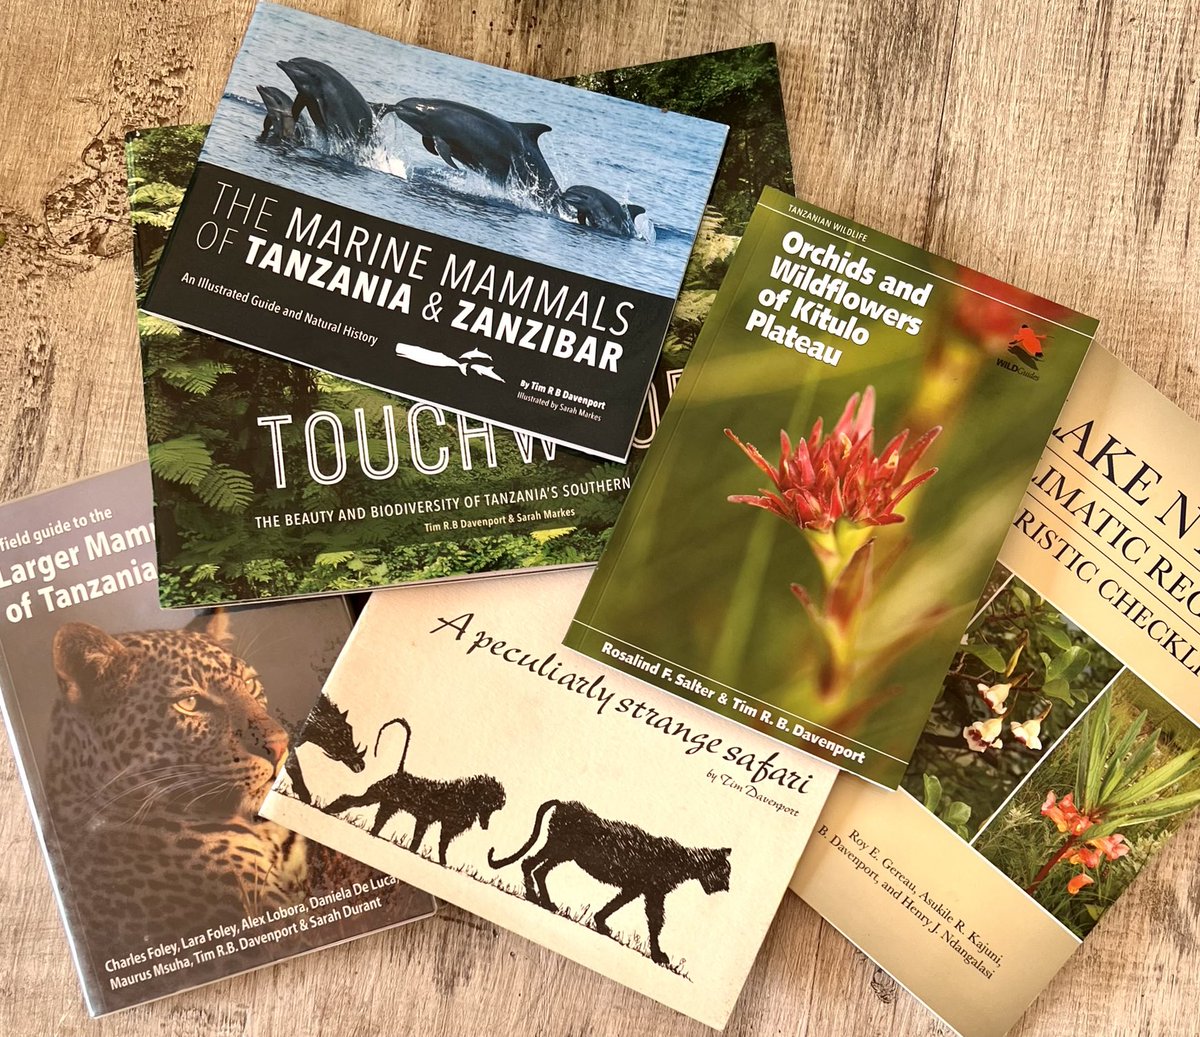 I am slowly working on two new and different books; one technical and one more experiential and proscriptive. Meanwhile, happy to say the Southern Highlands and Marine Mammals books are now available as e-versions, and new Orchid books are now in-country. DM me for details. #plug